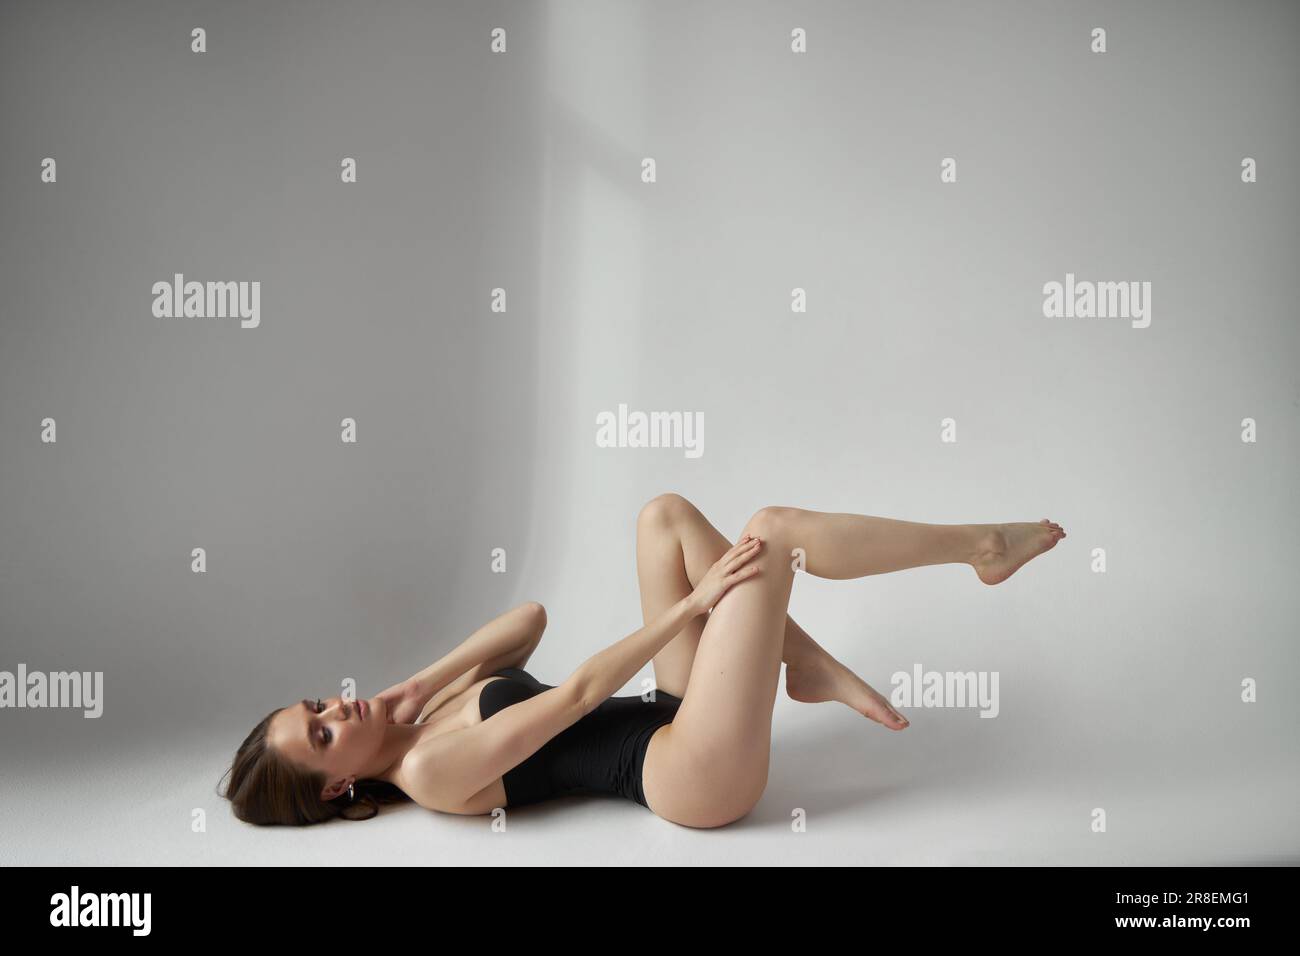 Sexy woman lying on the floor in a black bodysuit, studio portrait. Perfect body the figure of a young woman Stock Photo